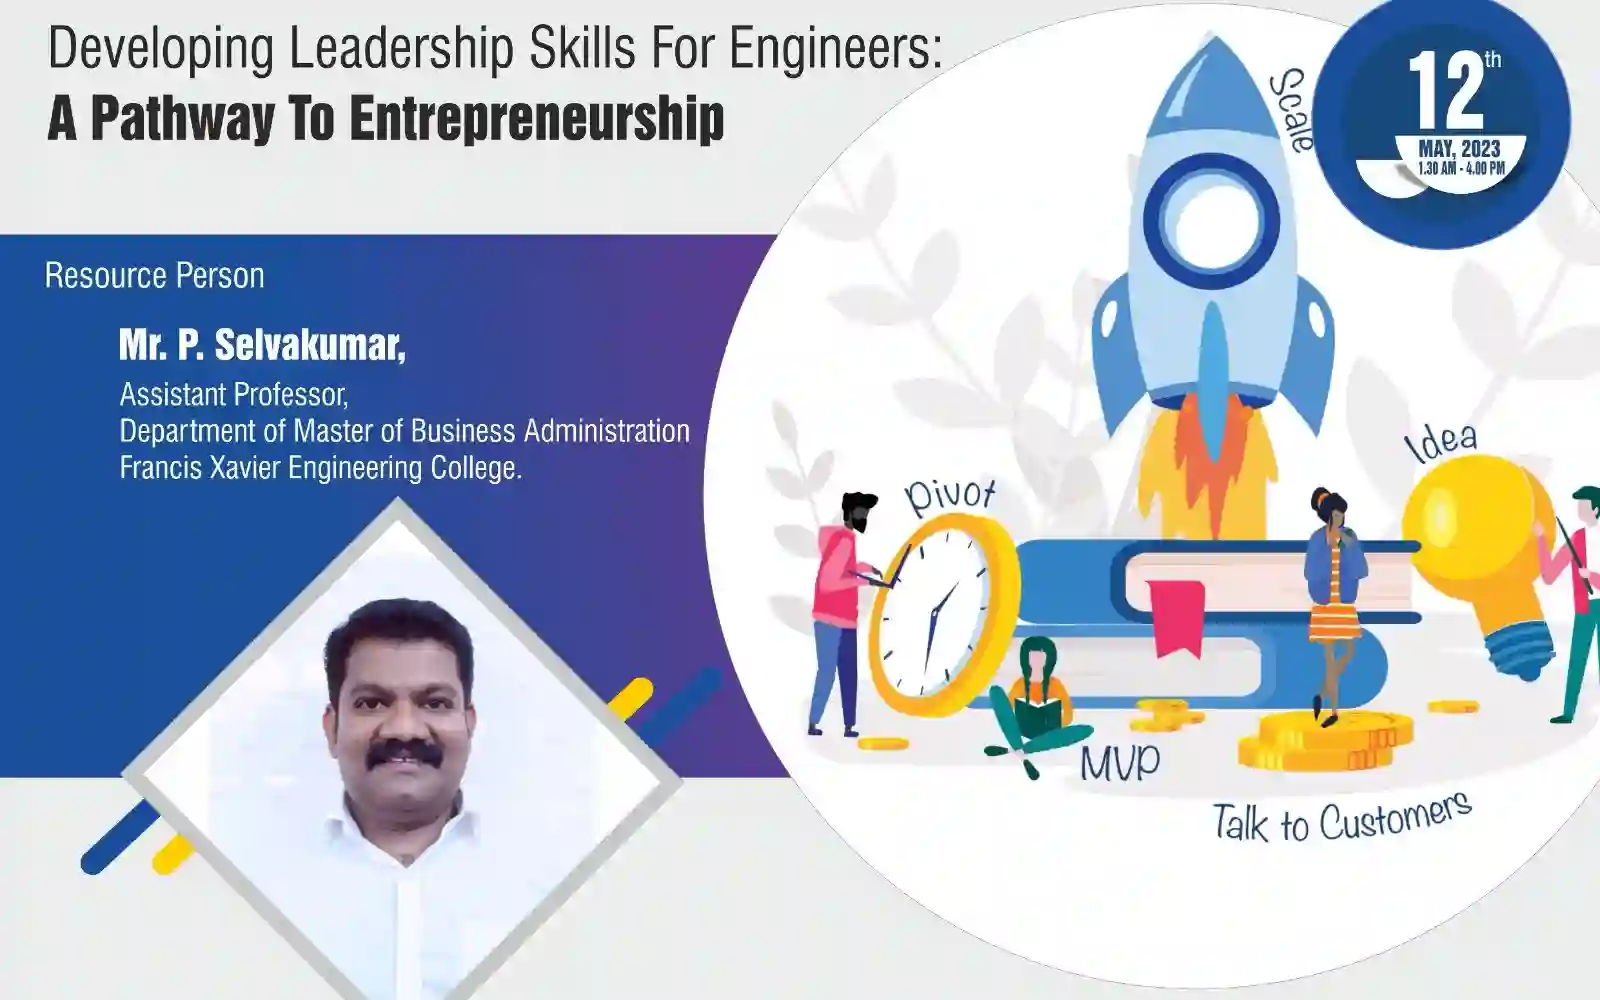 Developing Leadership Skills for Engineers: A Pathway to Entrepreneurship